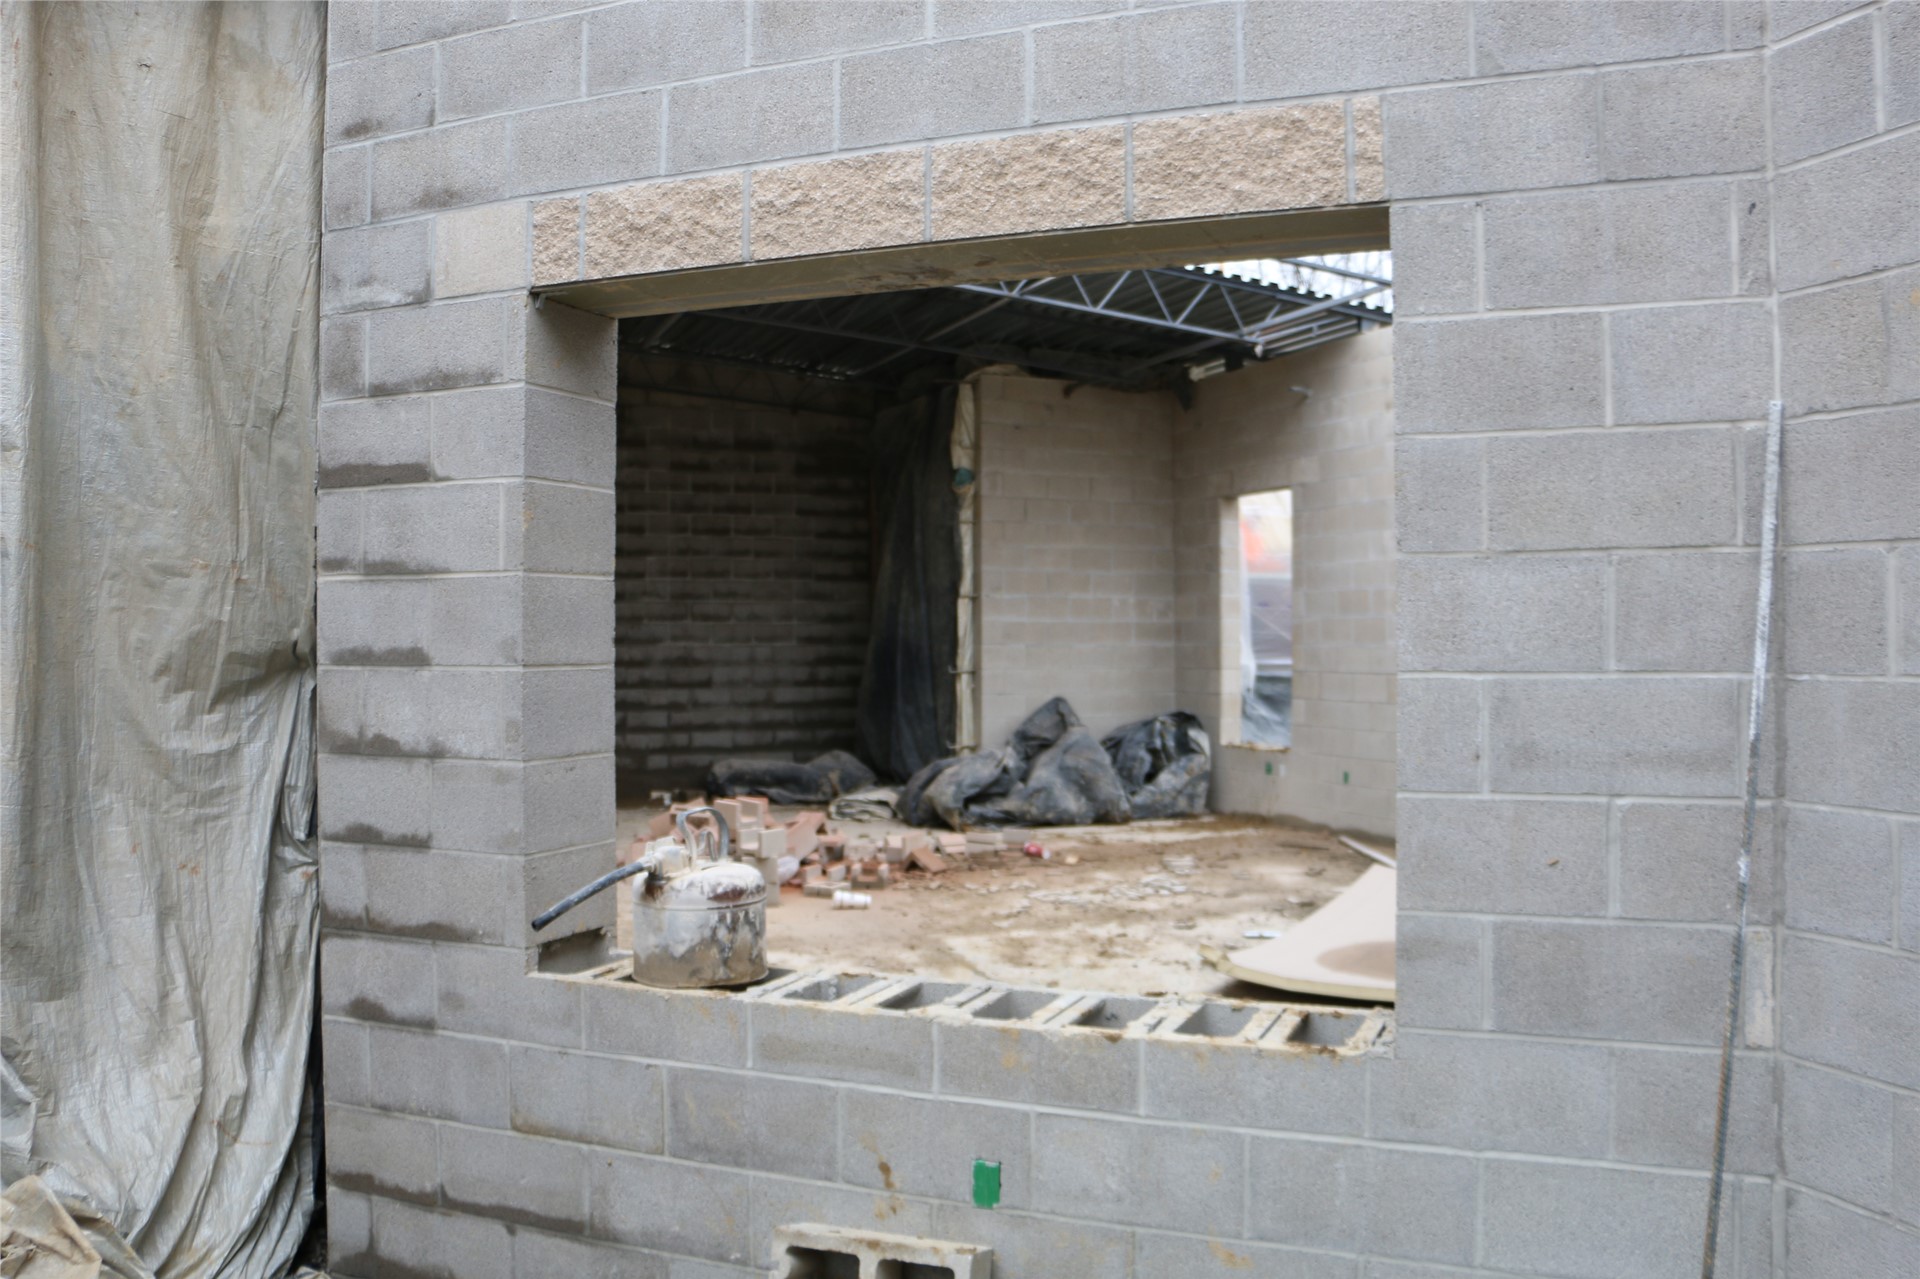 Concession area in the athletic wing